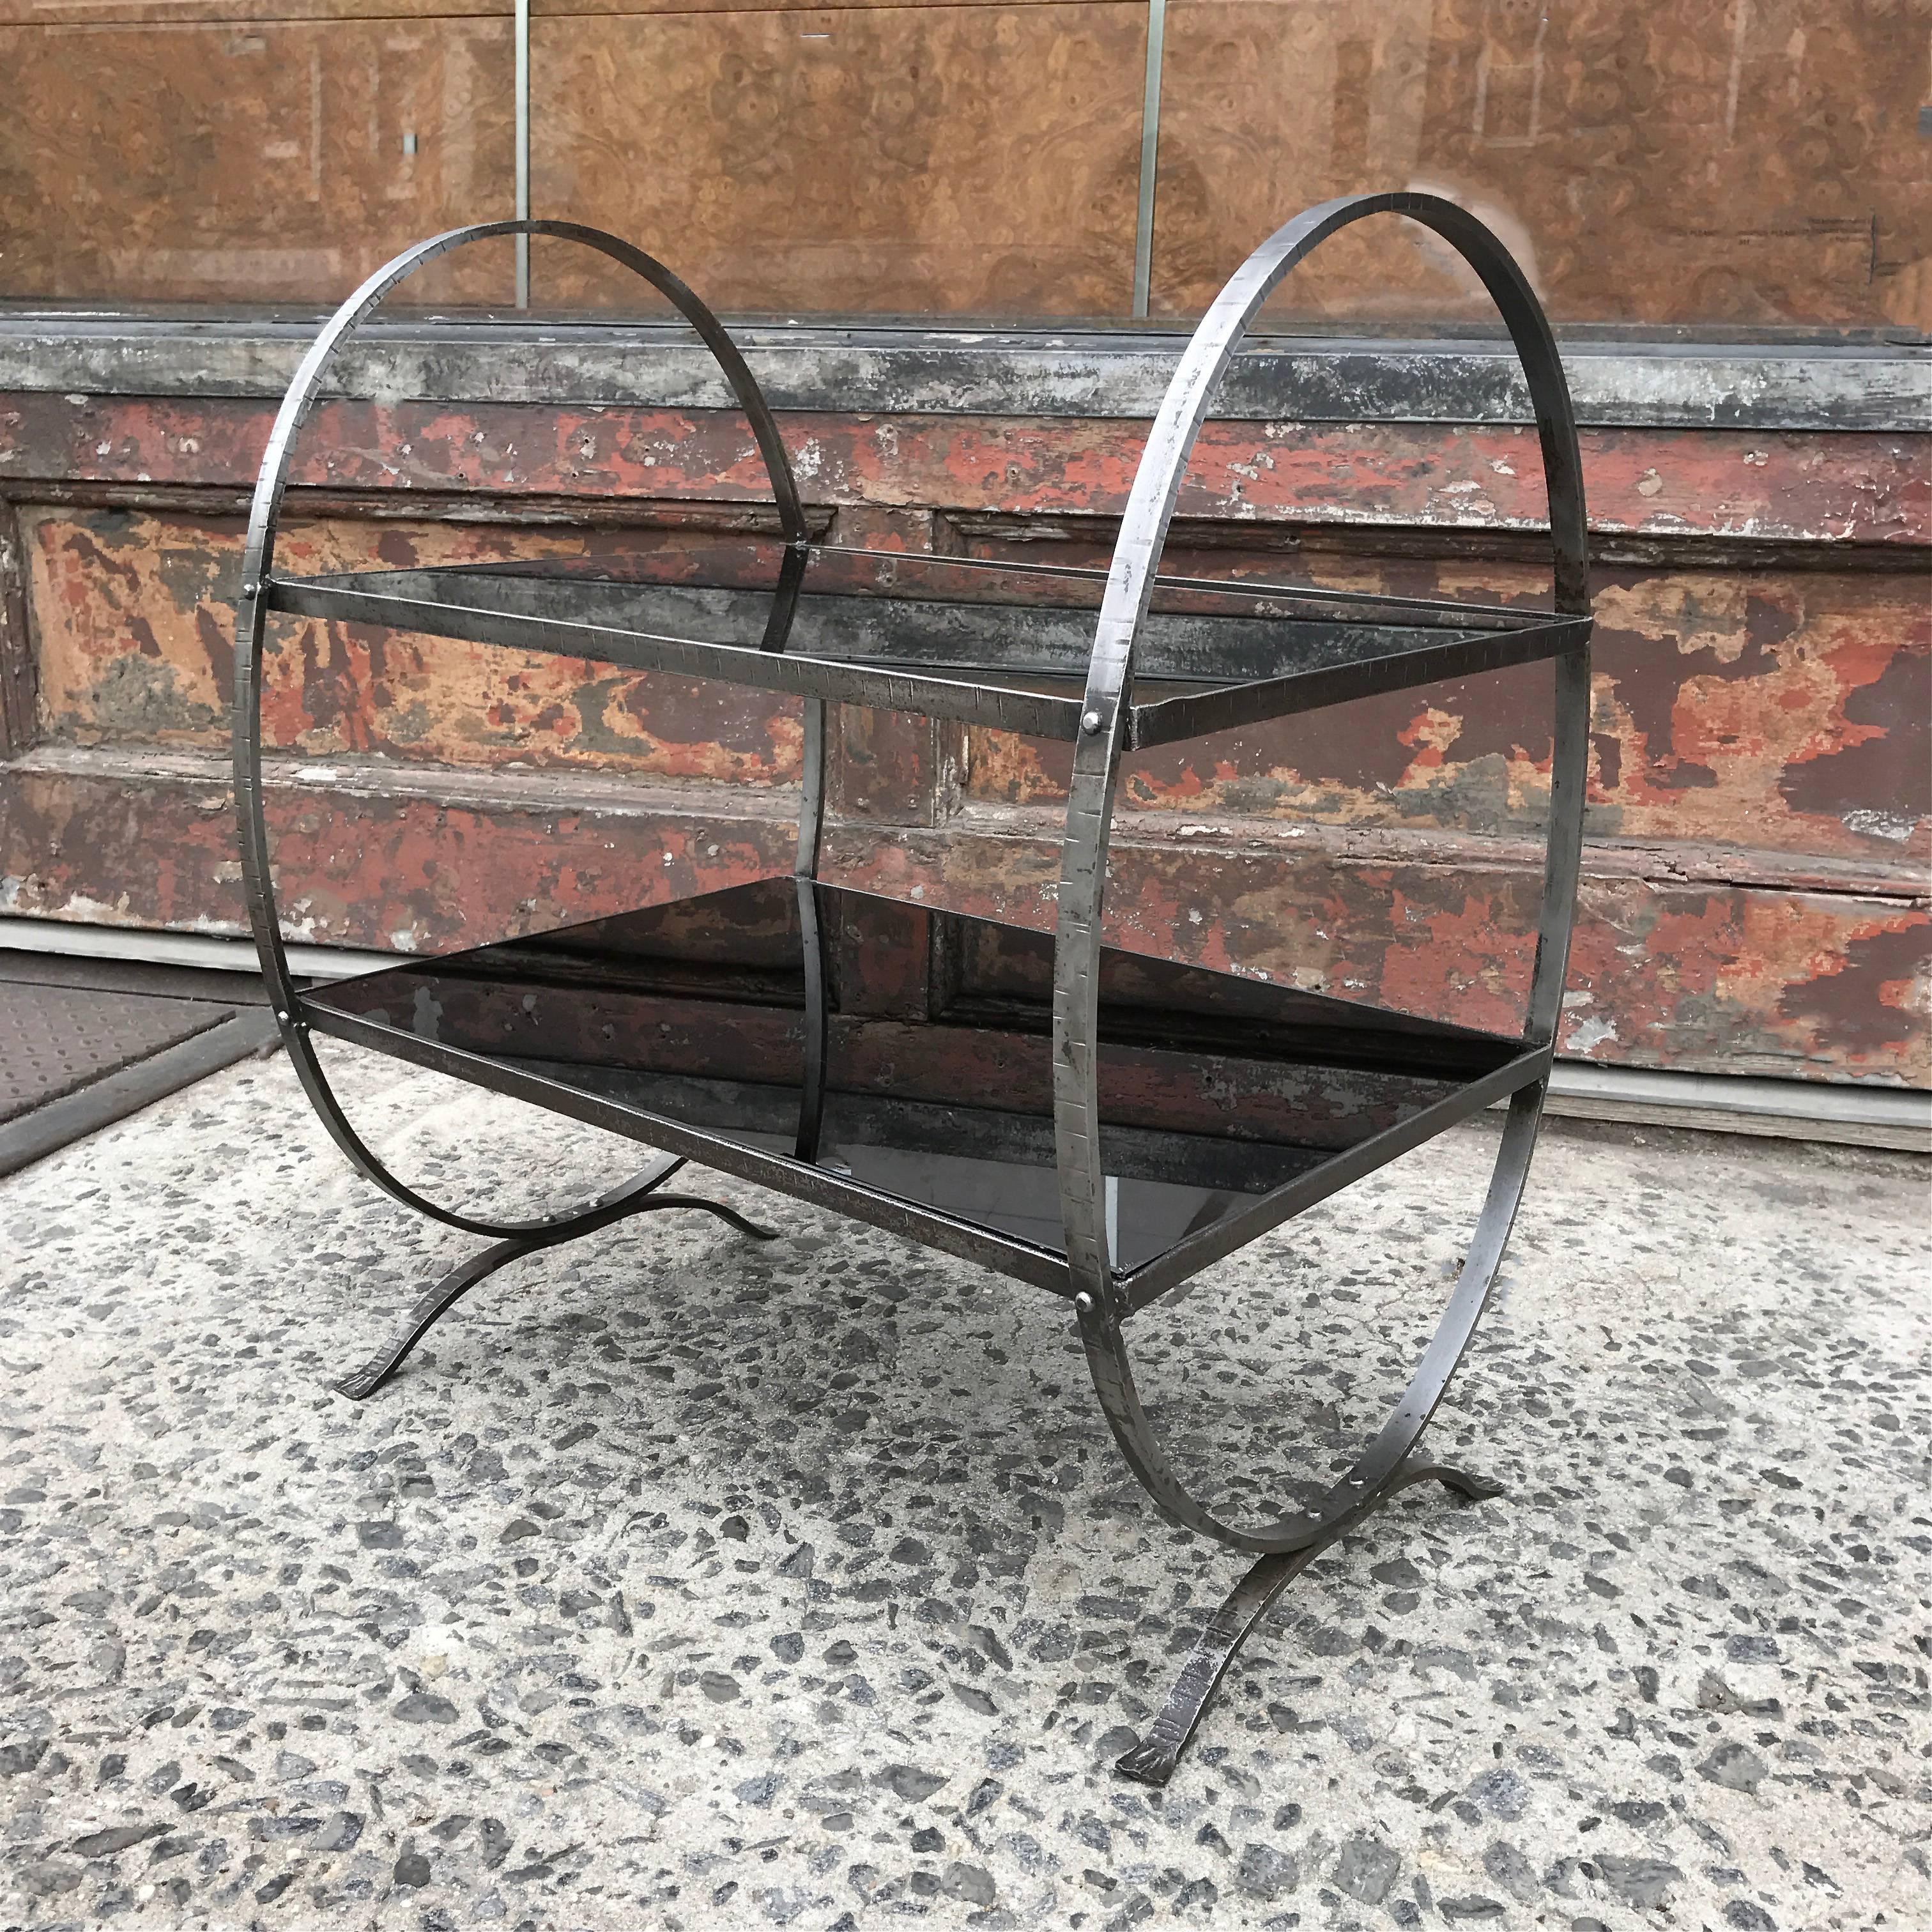 Art Deco, side table featuring looped, etched steel frame with two tiers of black glass; lower shelf is 10